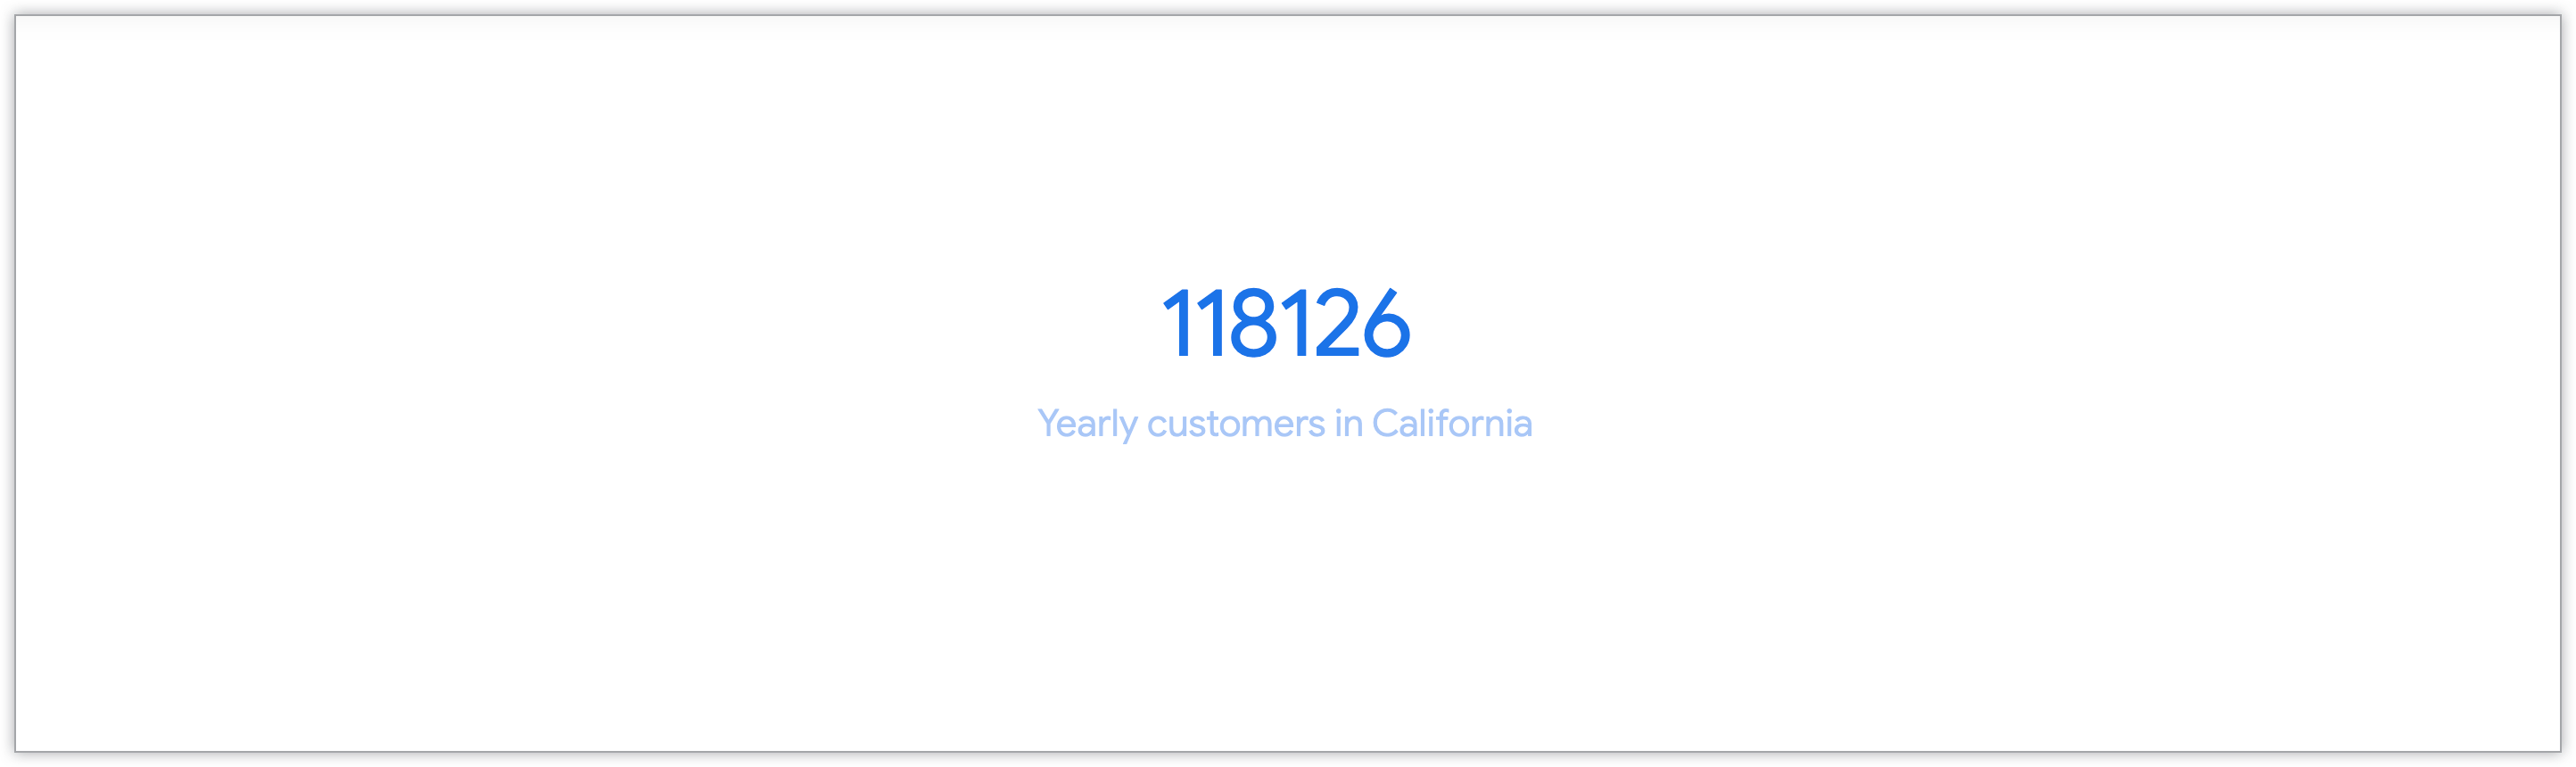 Single value chart showing the number of yearly customers from California.